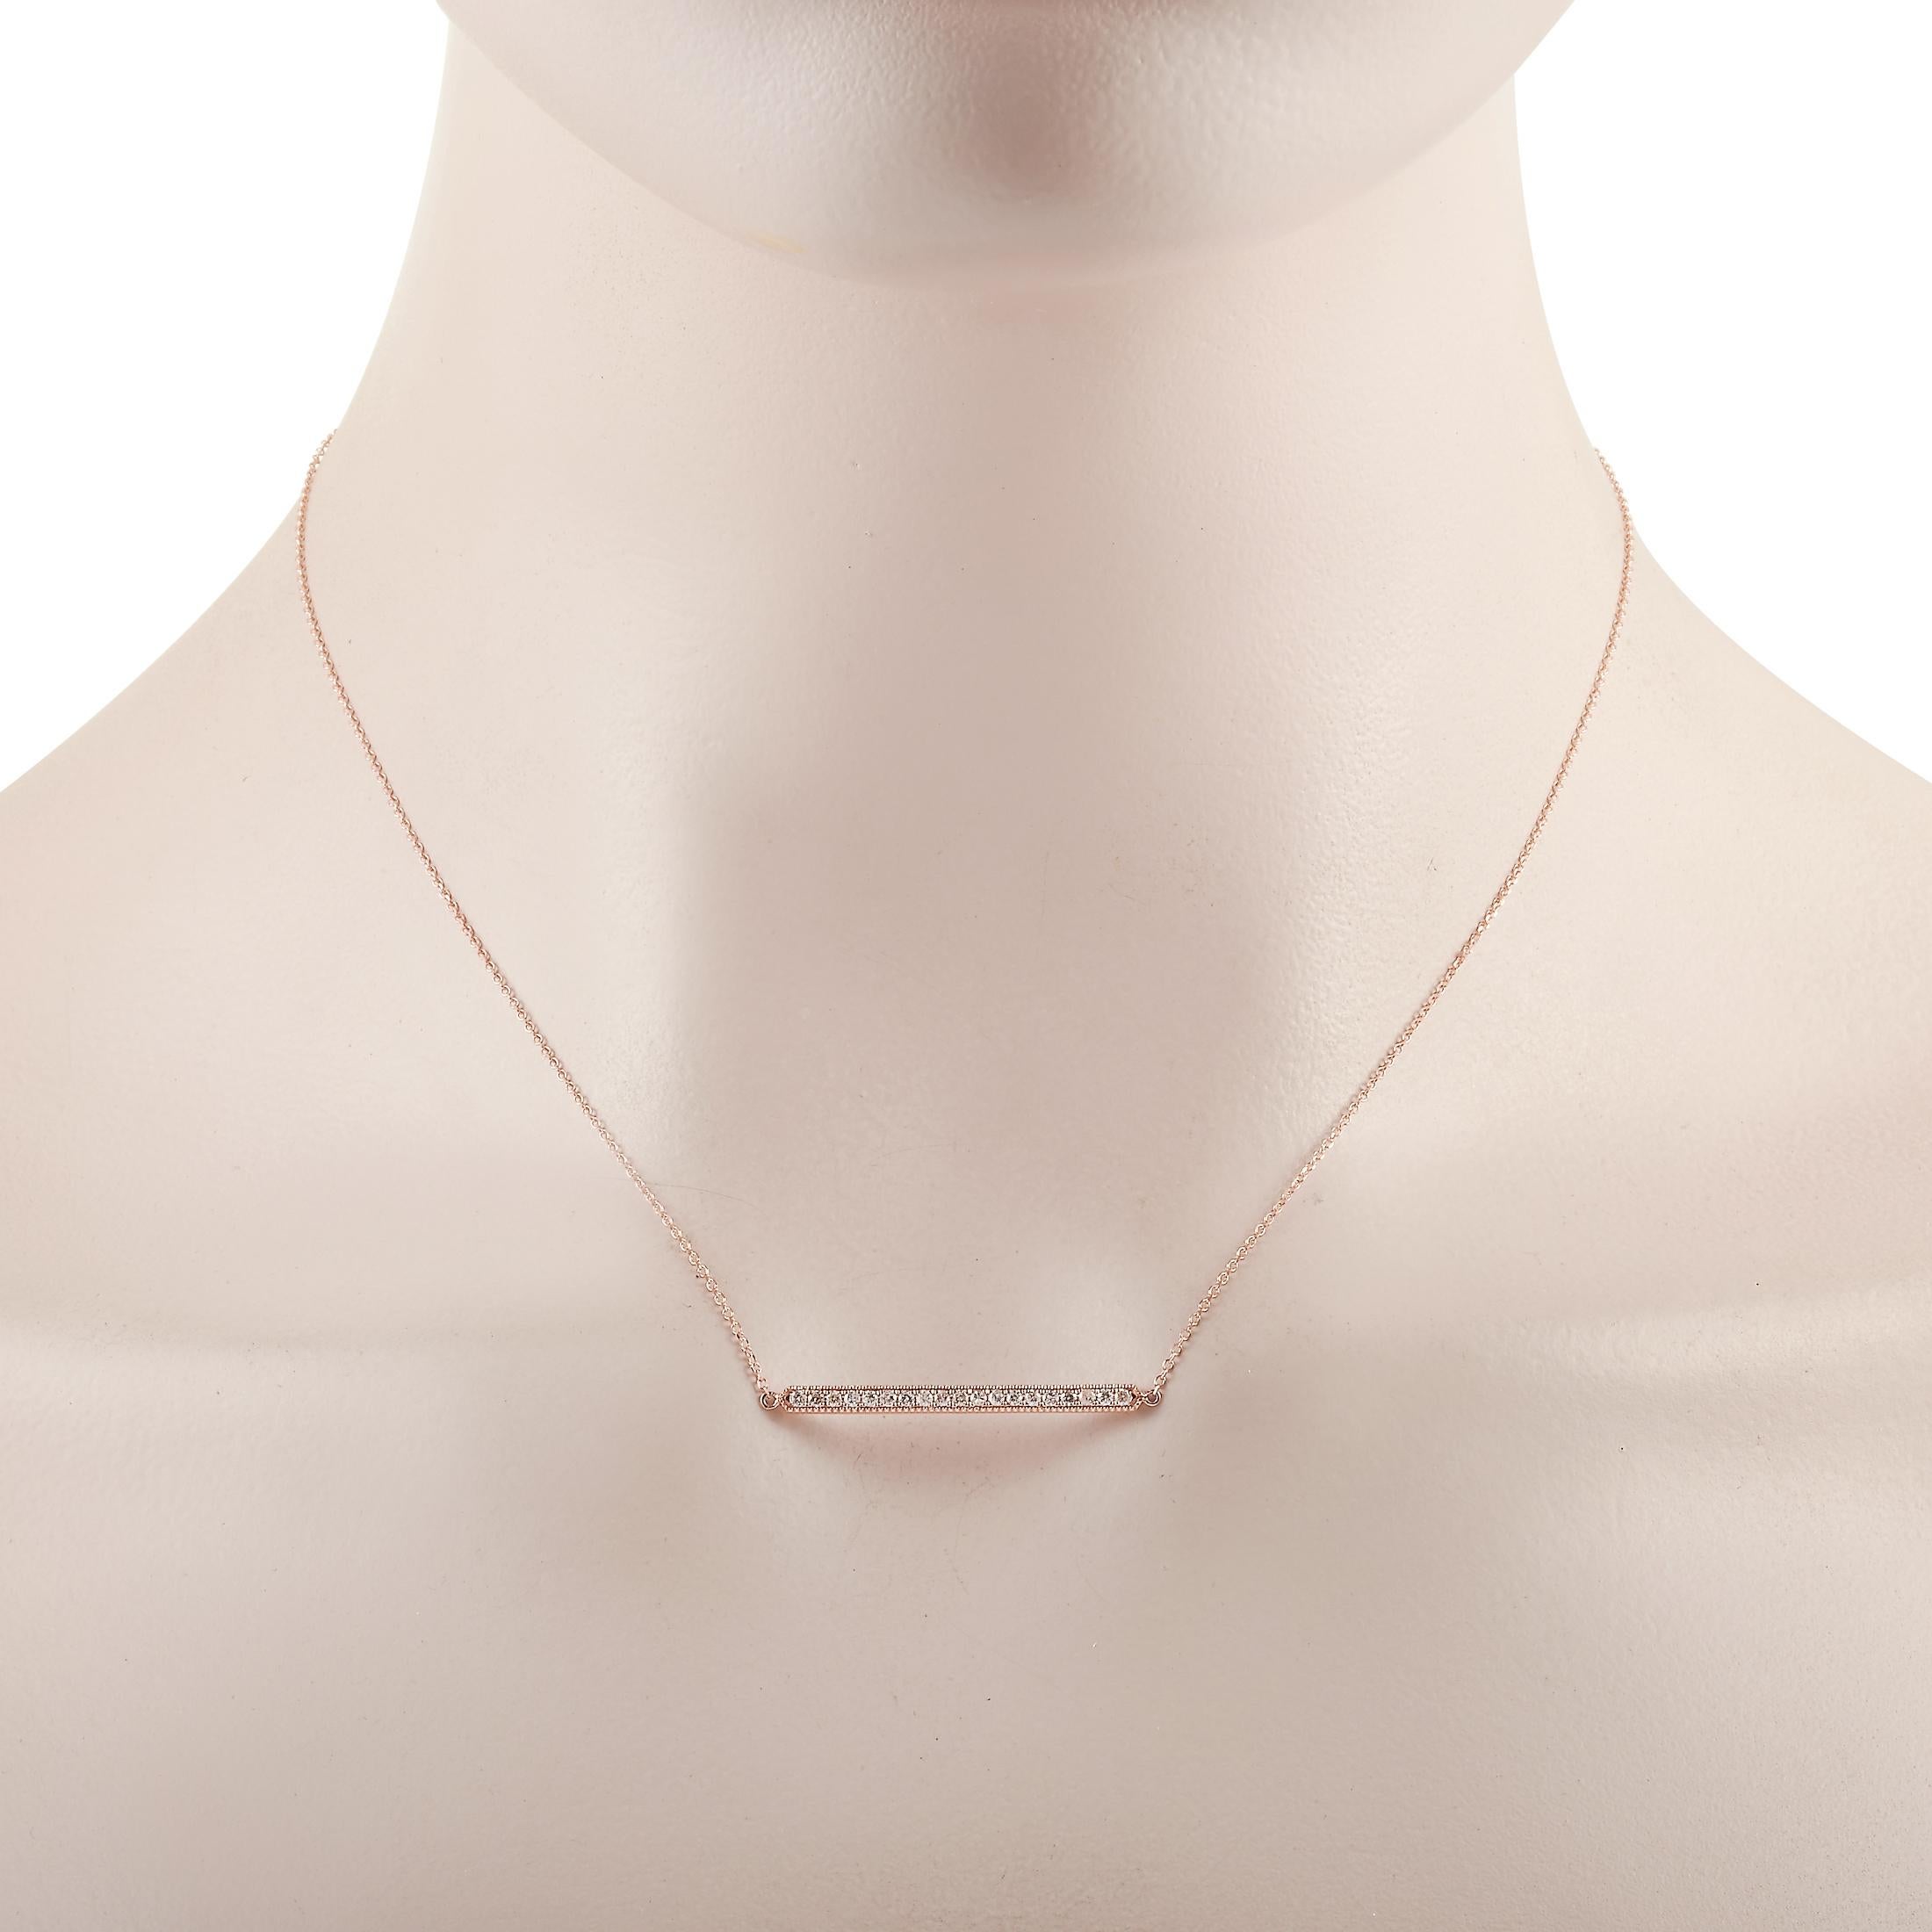 This LB Exclusive necklace is crafted from 14K rose gold and weighs 1.9 grams. It is presented with a 15” chain and boasts a pendant that measures 0.13” in length and 1.25” in width. The necklace is set with diamonds that total 0.25 carats.
 
